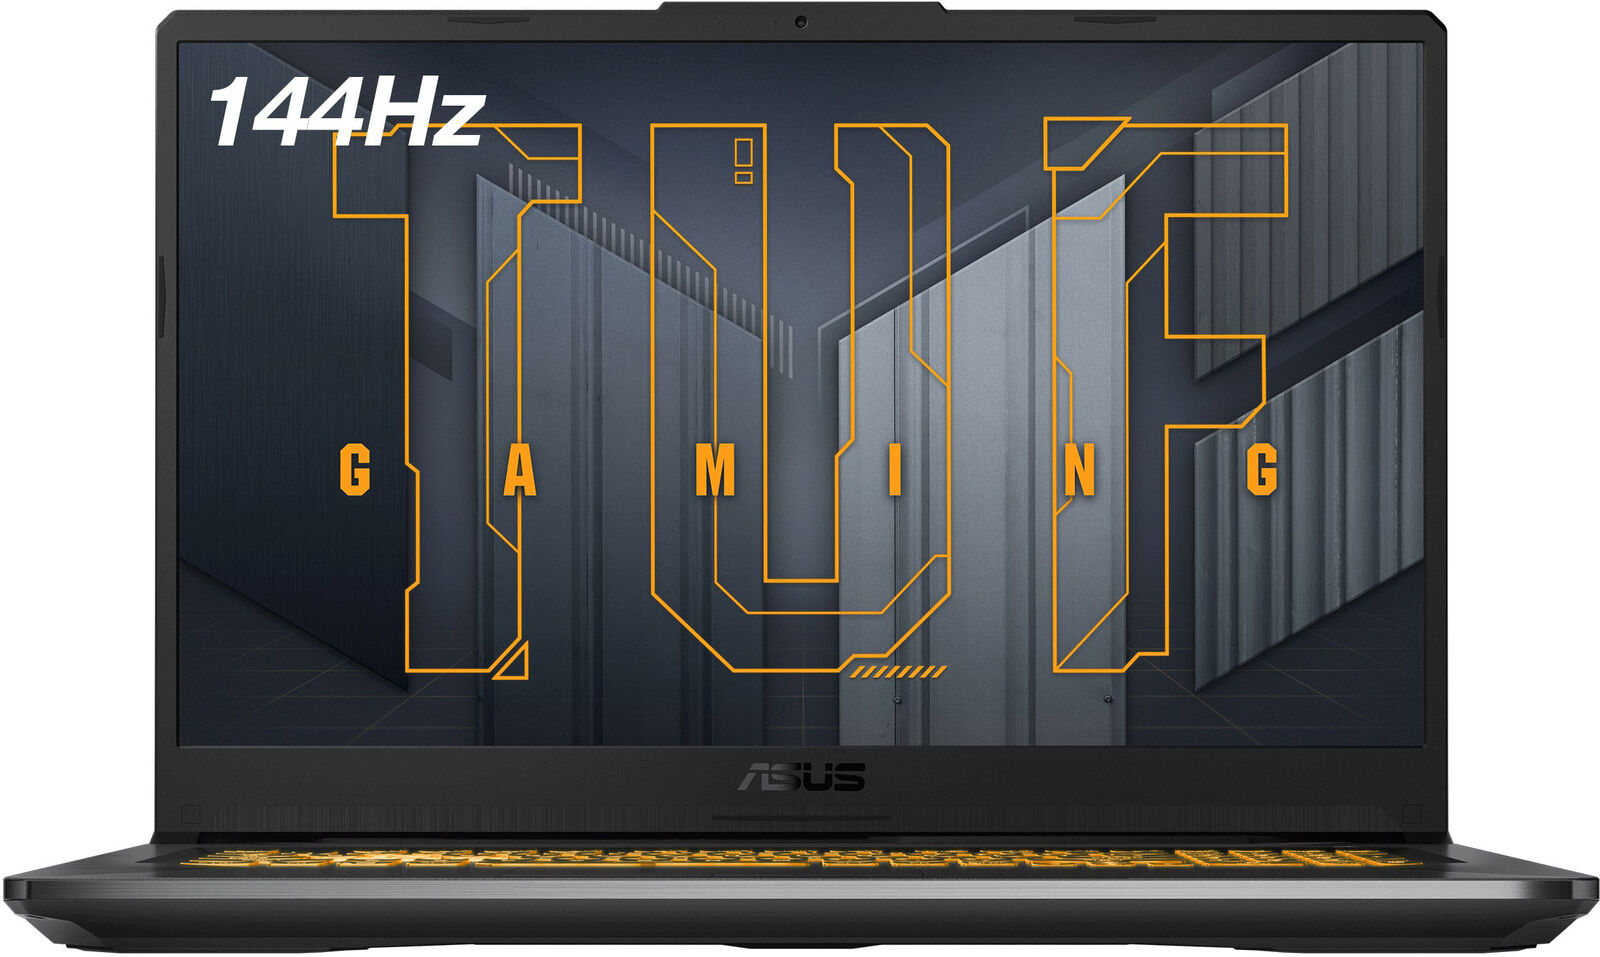 ASUS - TUF Gaming 17.3" Laptop - Intel Core i5 - 8GB Memory - NVIDIA ON SALE AT BEST BUY!